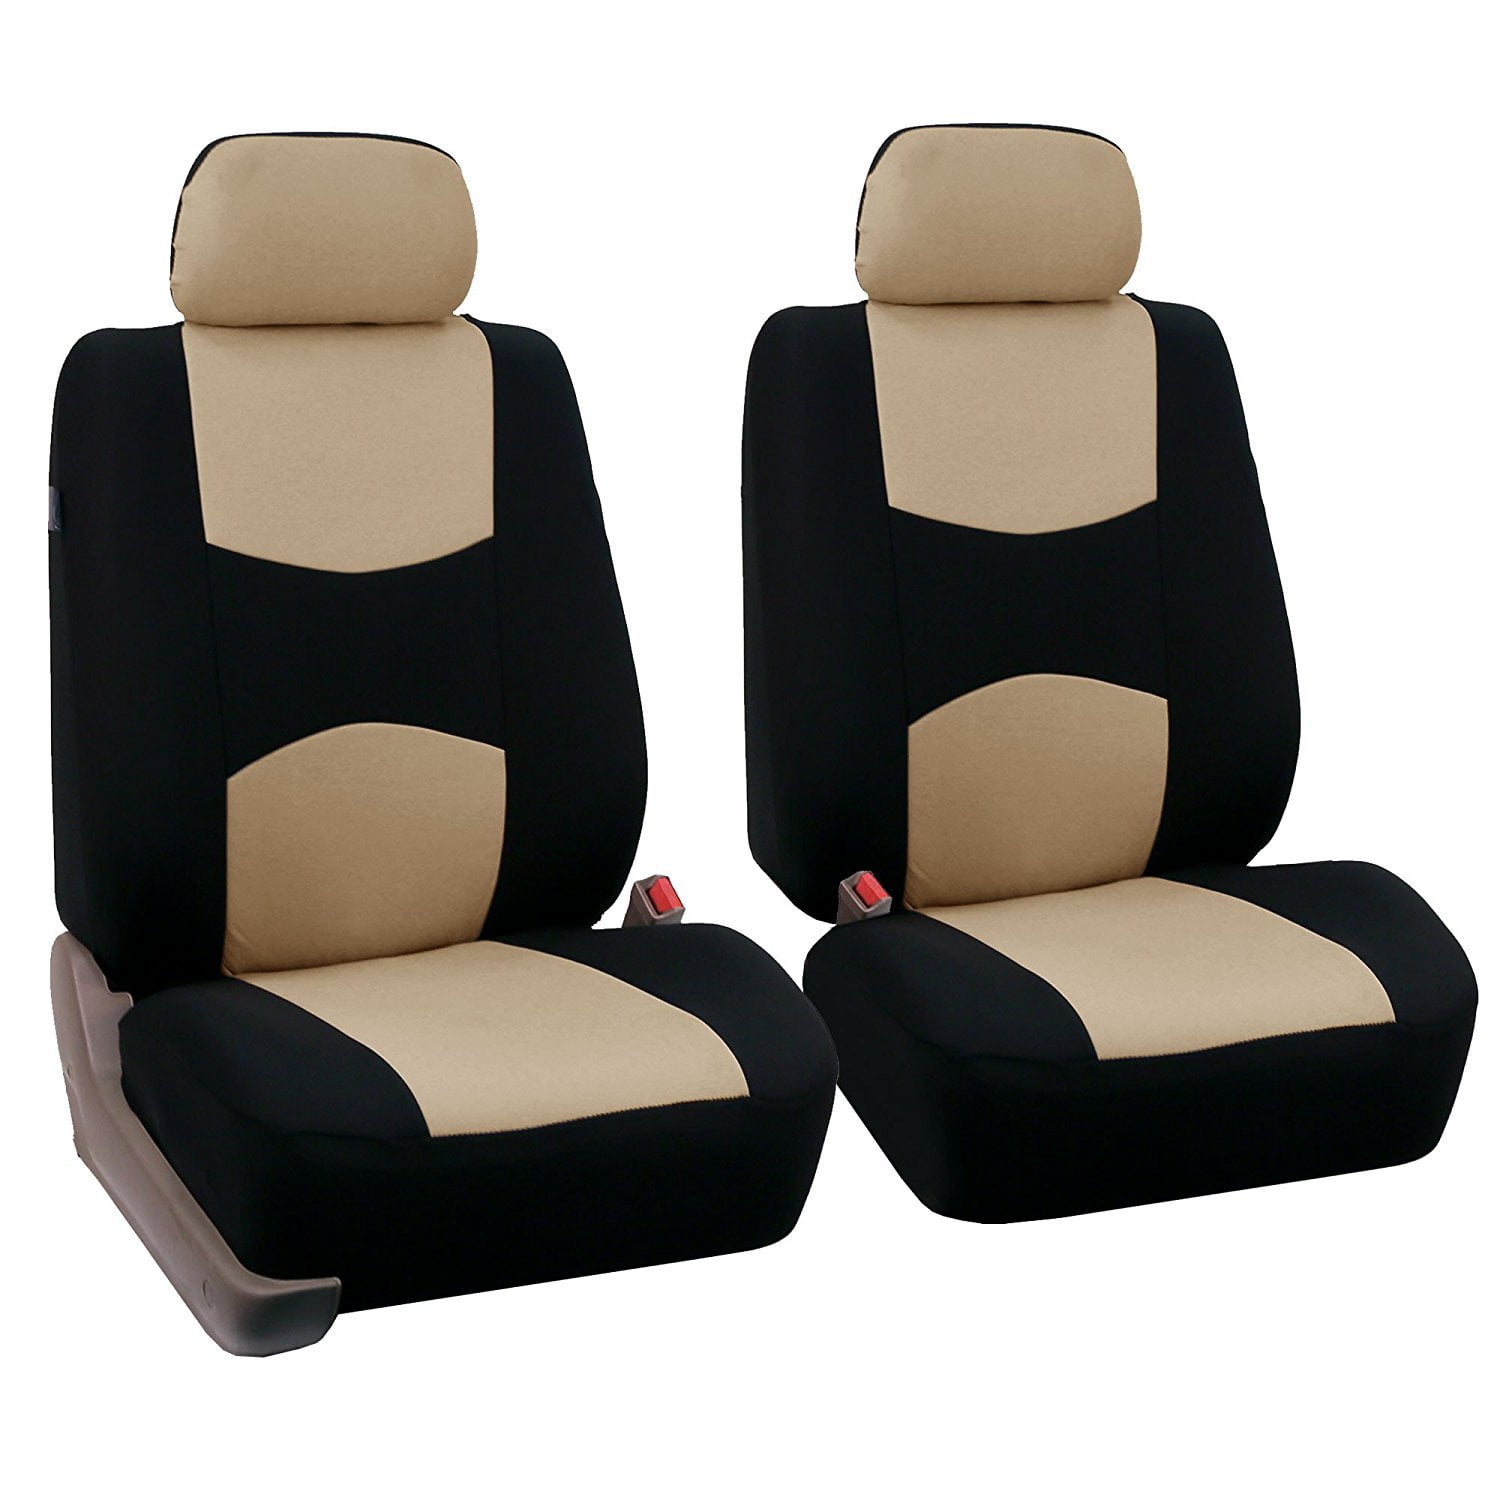 Car Seat Backrest Anti-Slip Pad Cashmere Protector Cover For